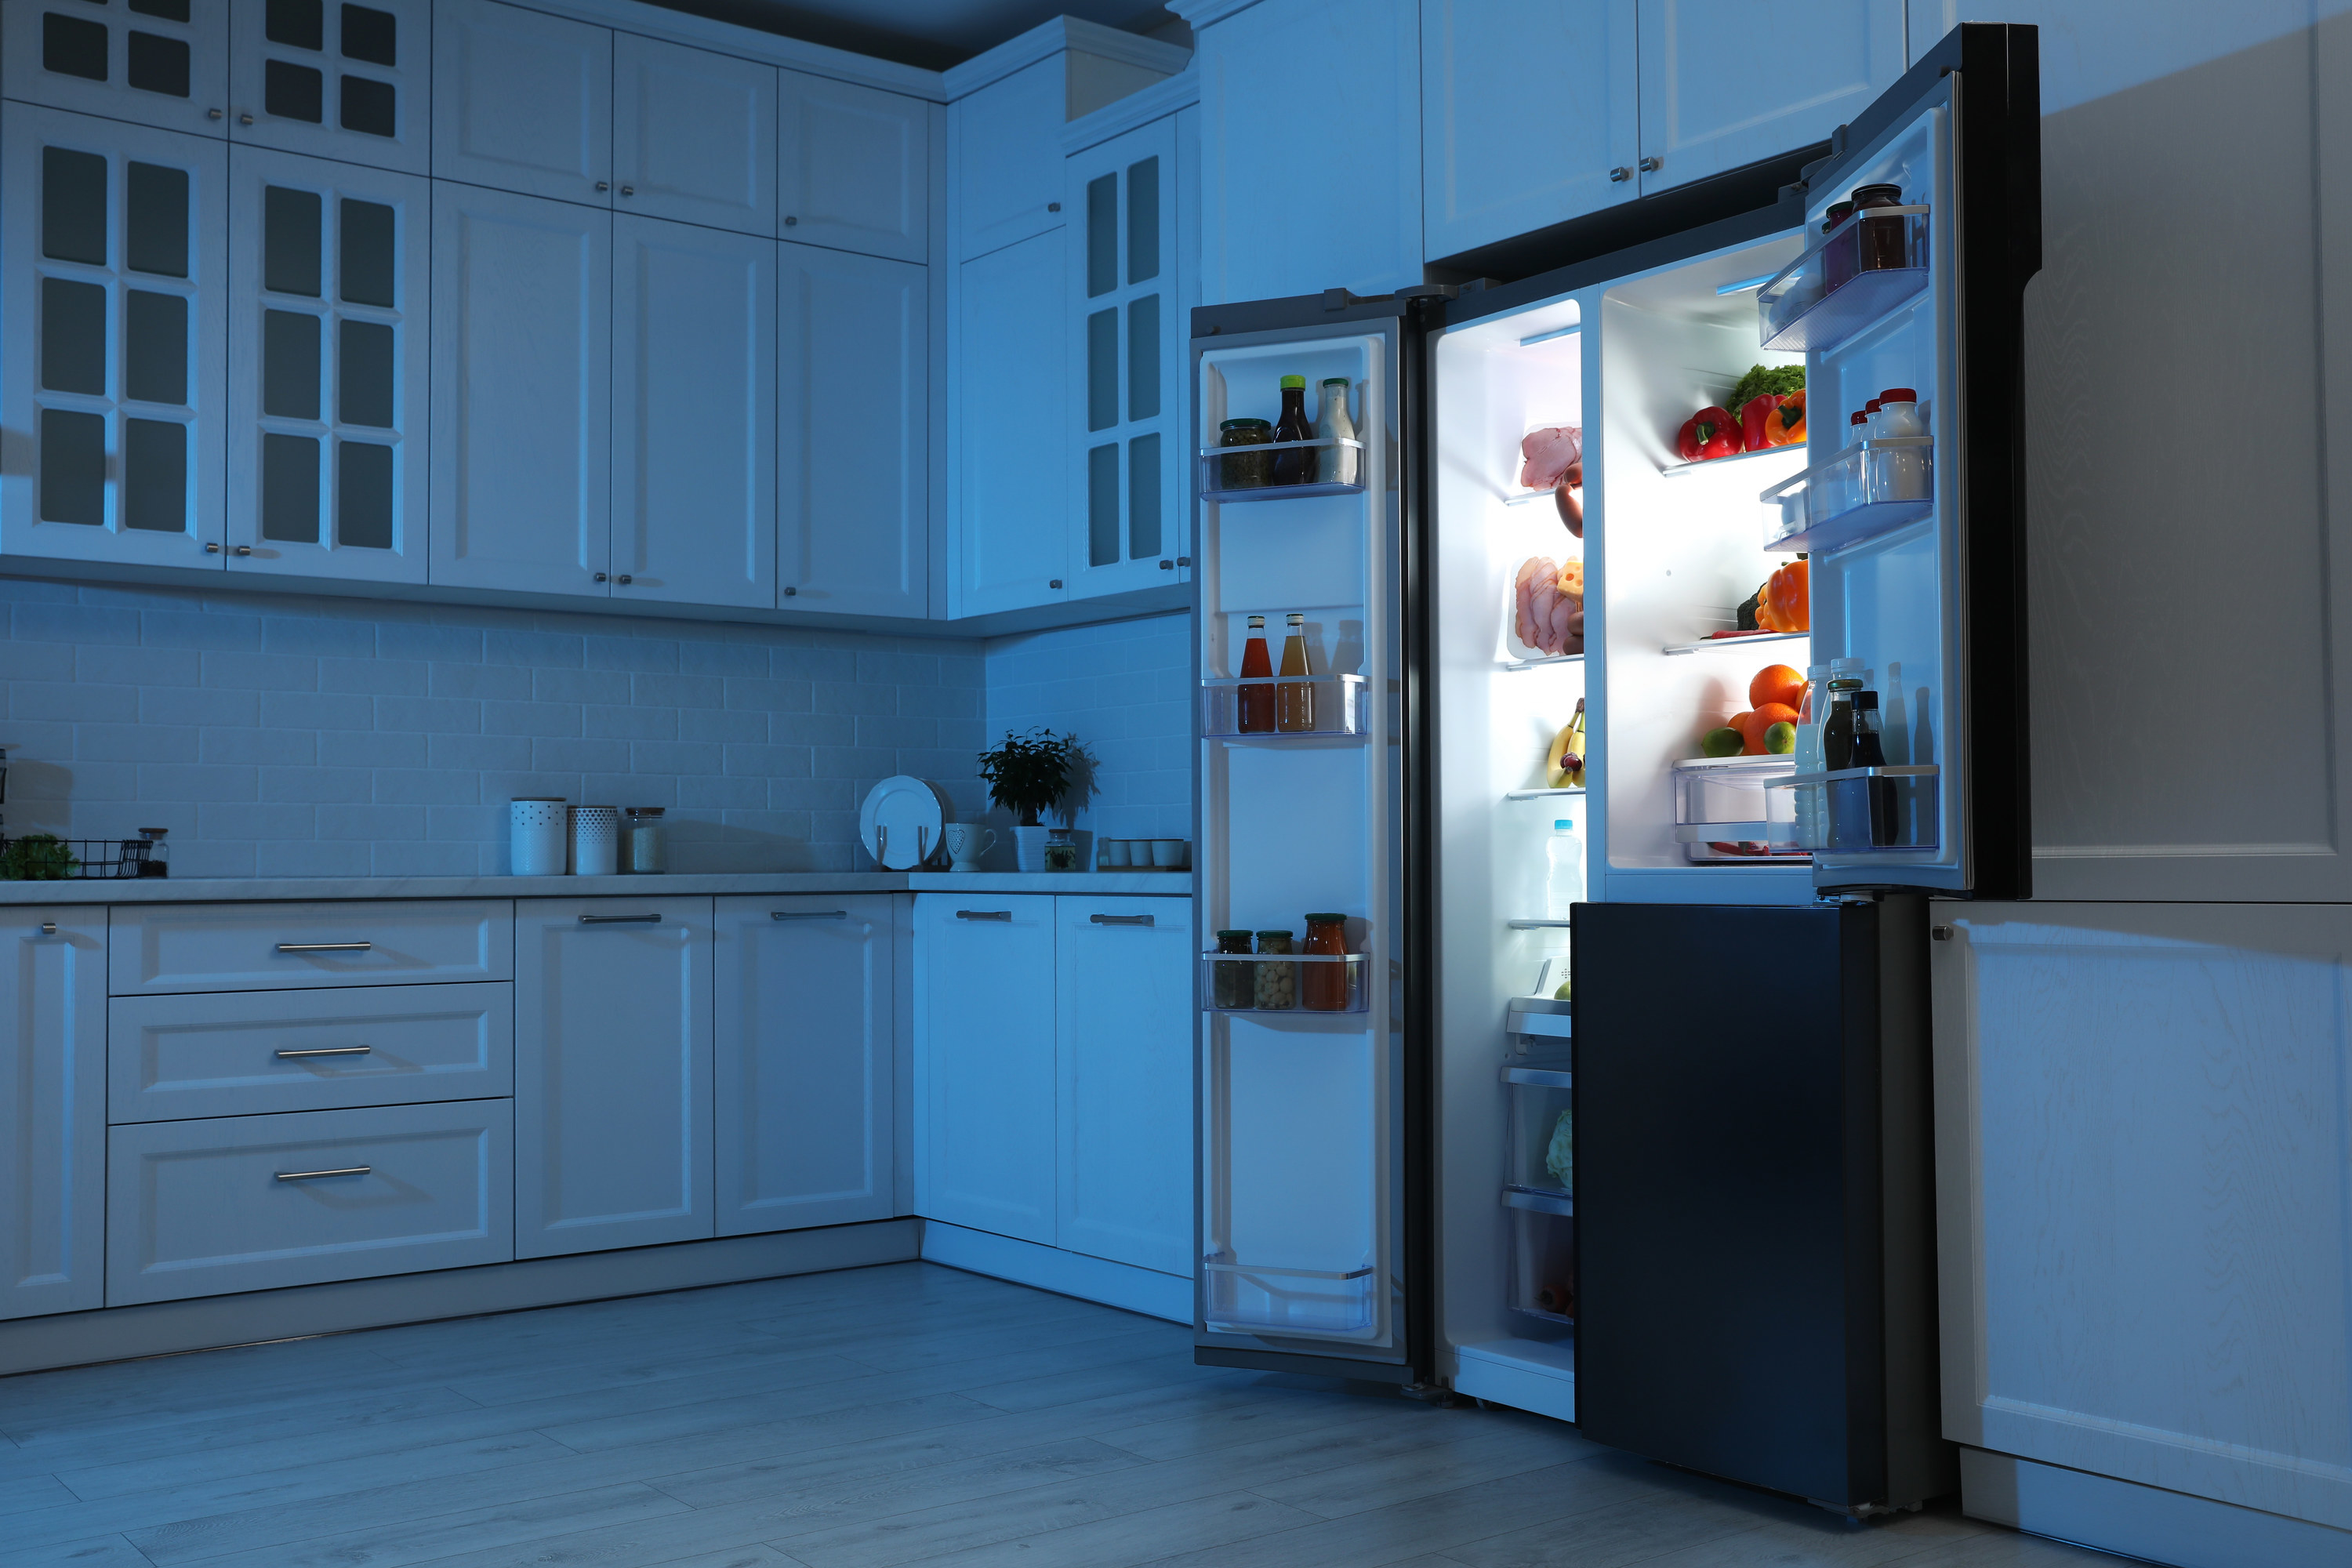 An open refrigerator, with items in the door shelves